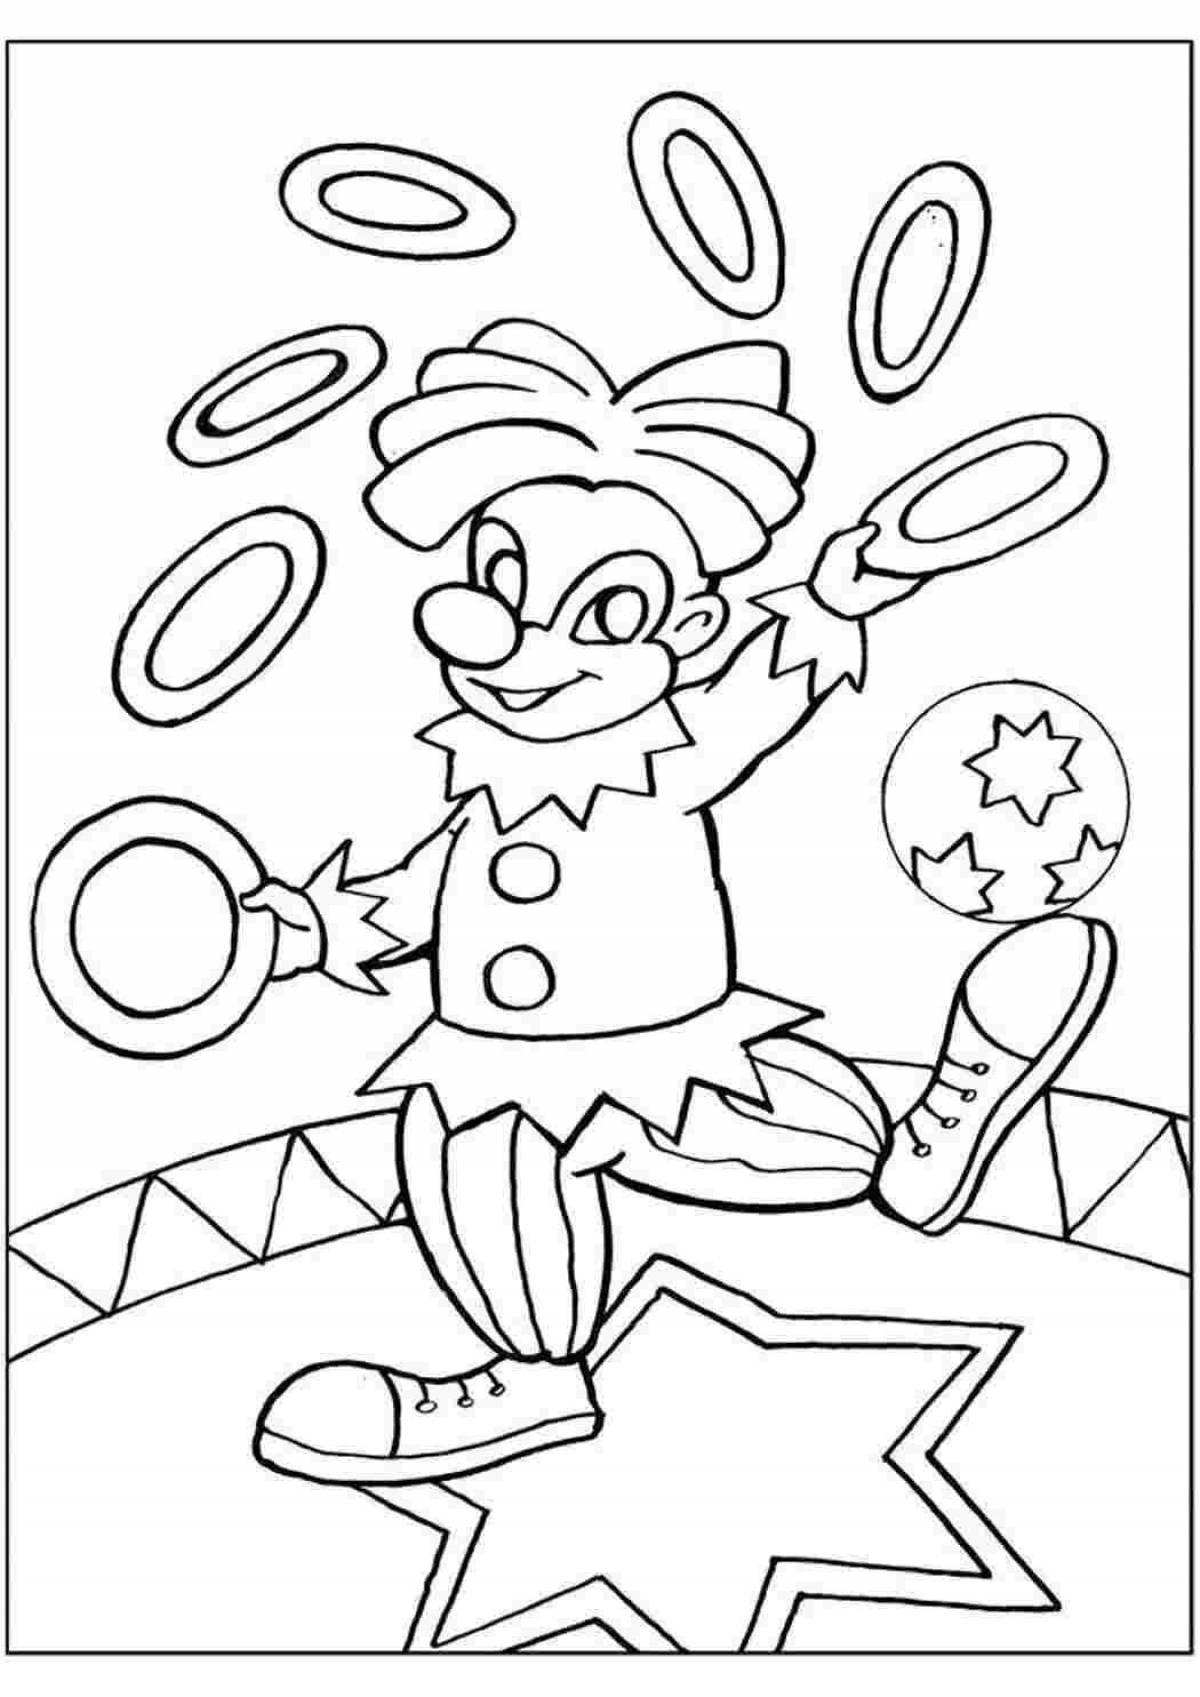 Great circus coloring book for kids